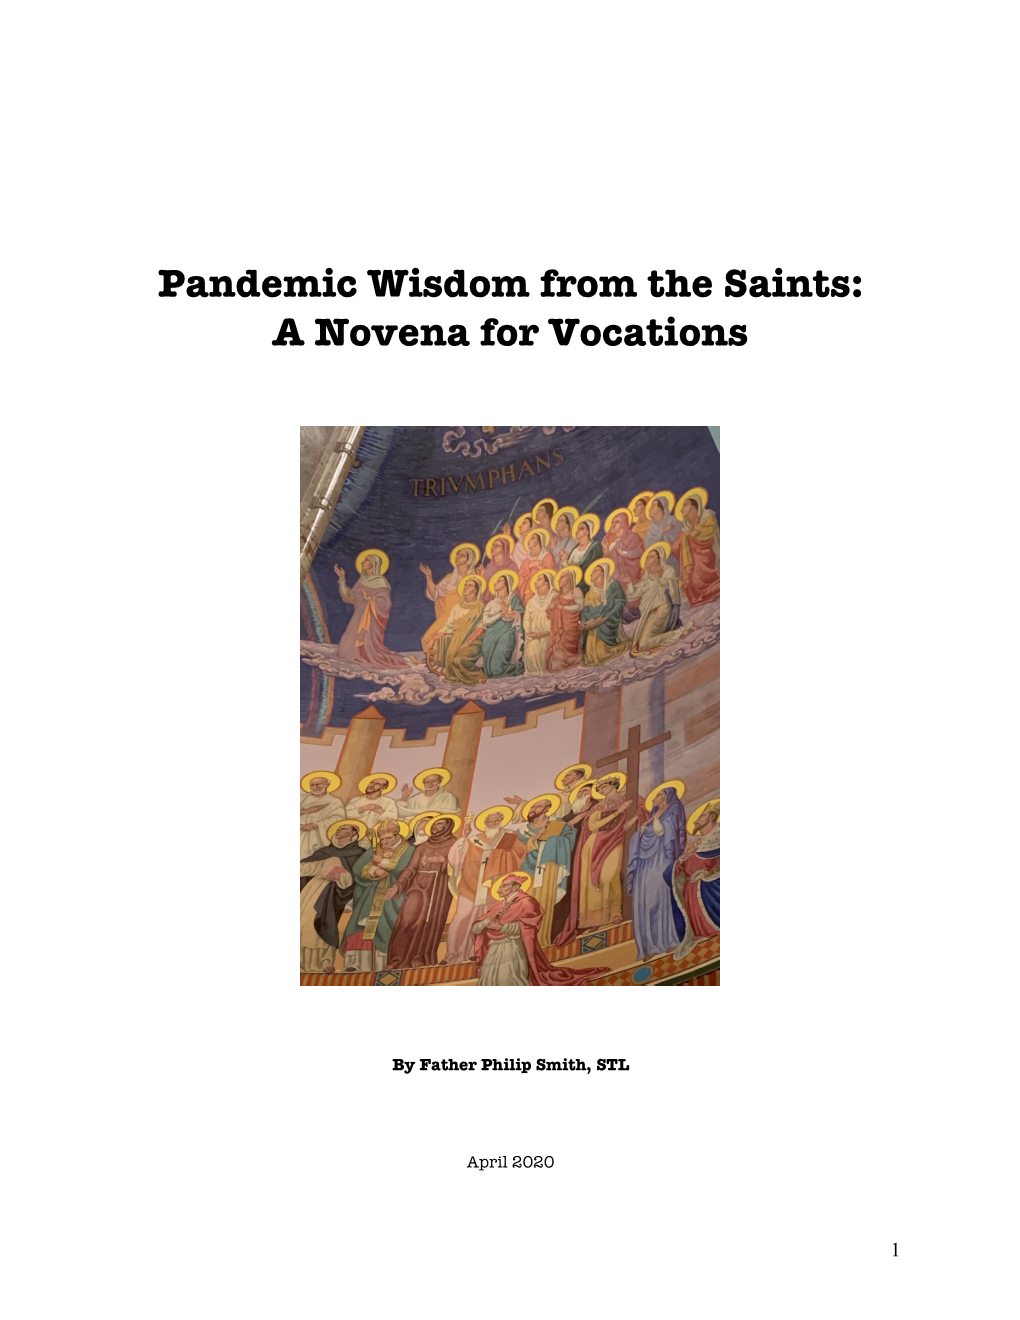 Pandemic Wisdom from the Saints: a Novena for Vocations